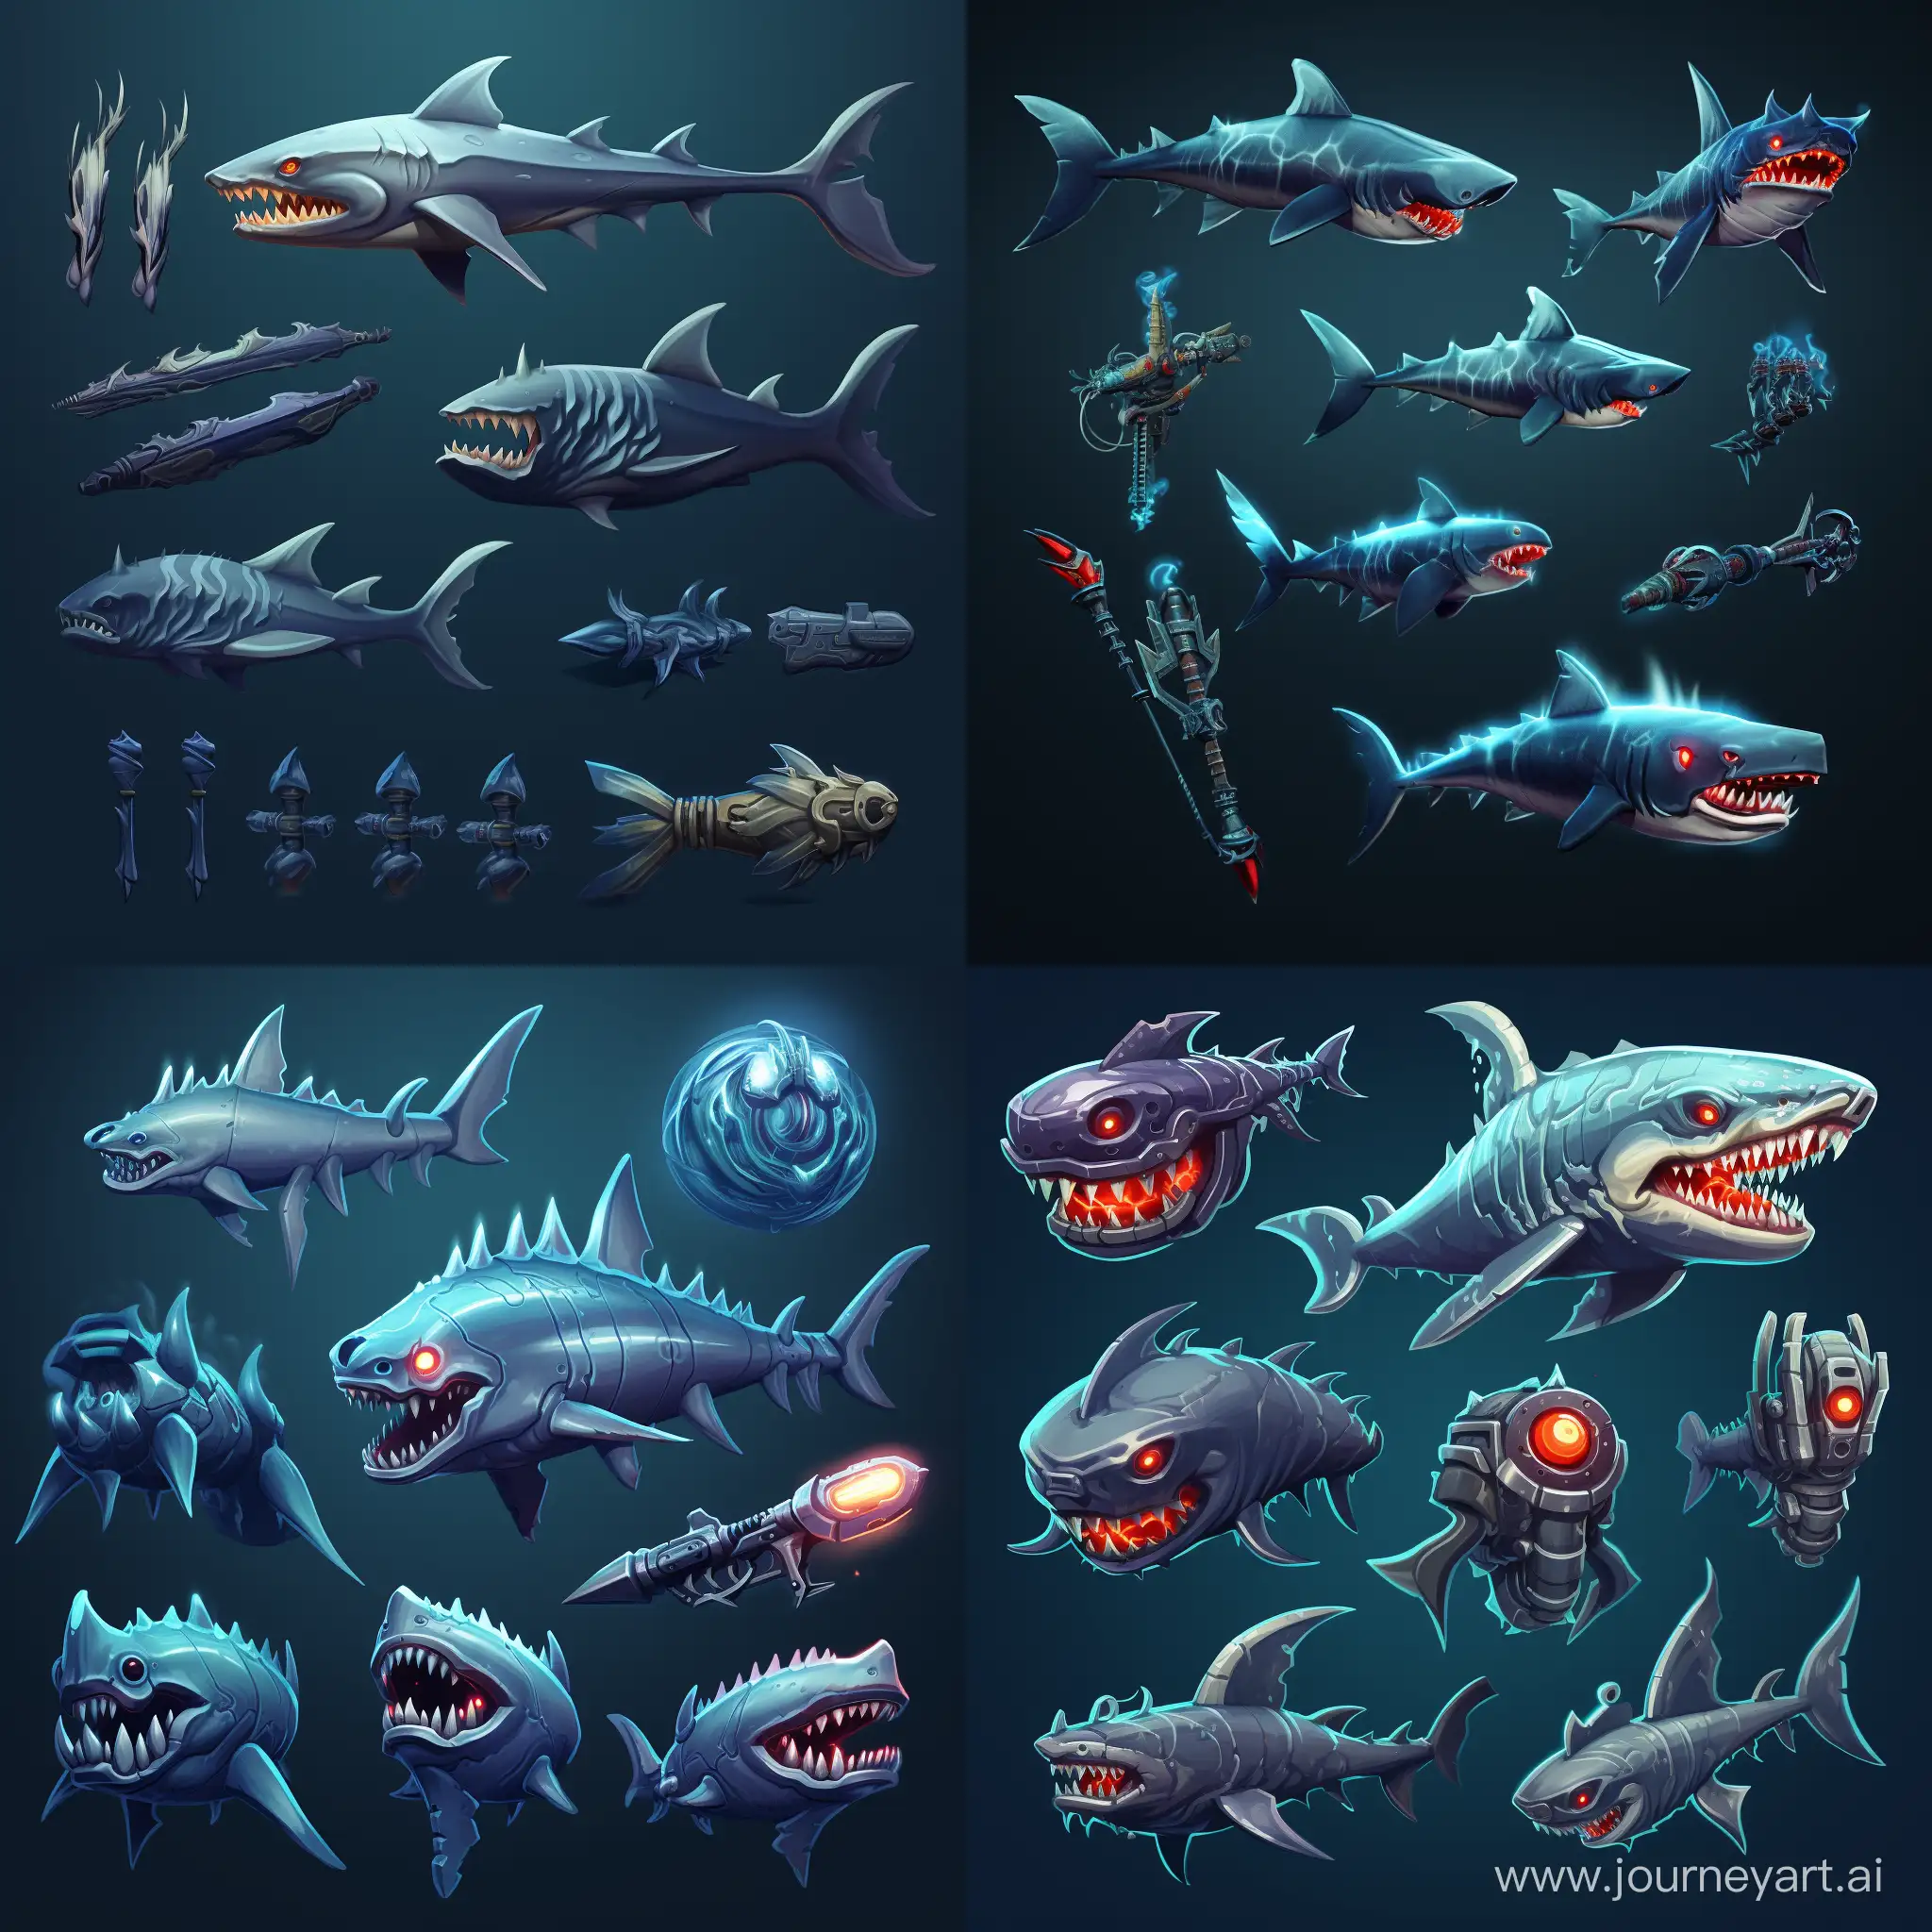 Dynamic-Weapons-and-Effects-Sprite-Sheet-with-Illuminated-Shark-Theme